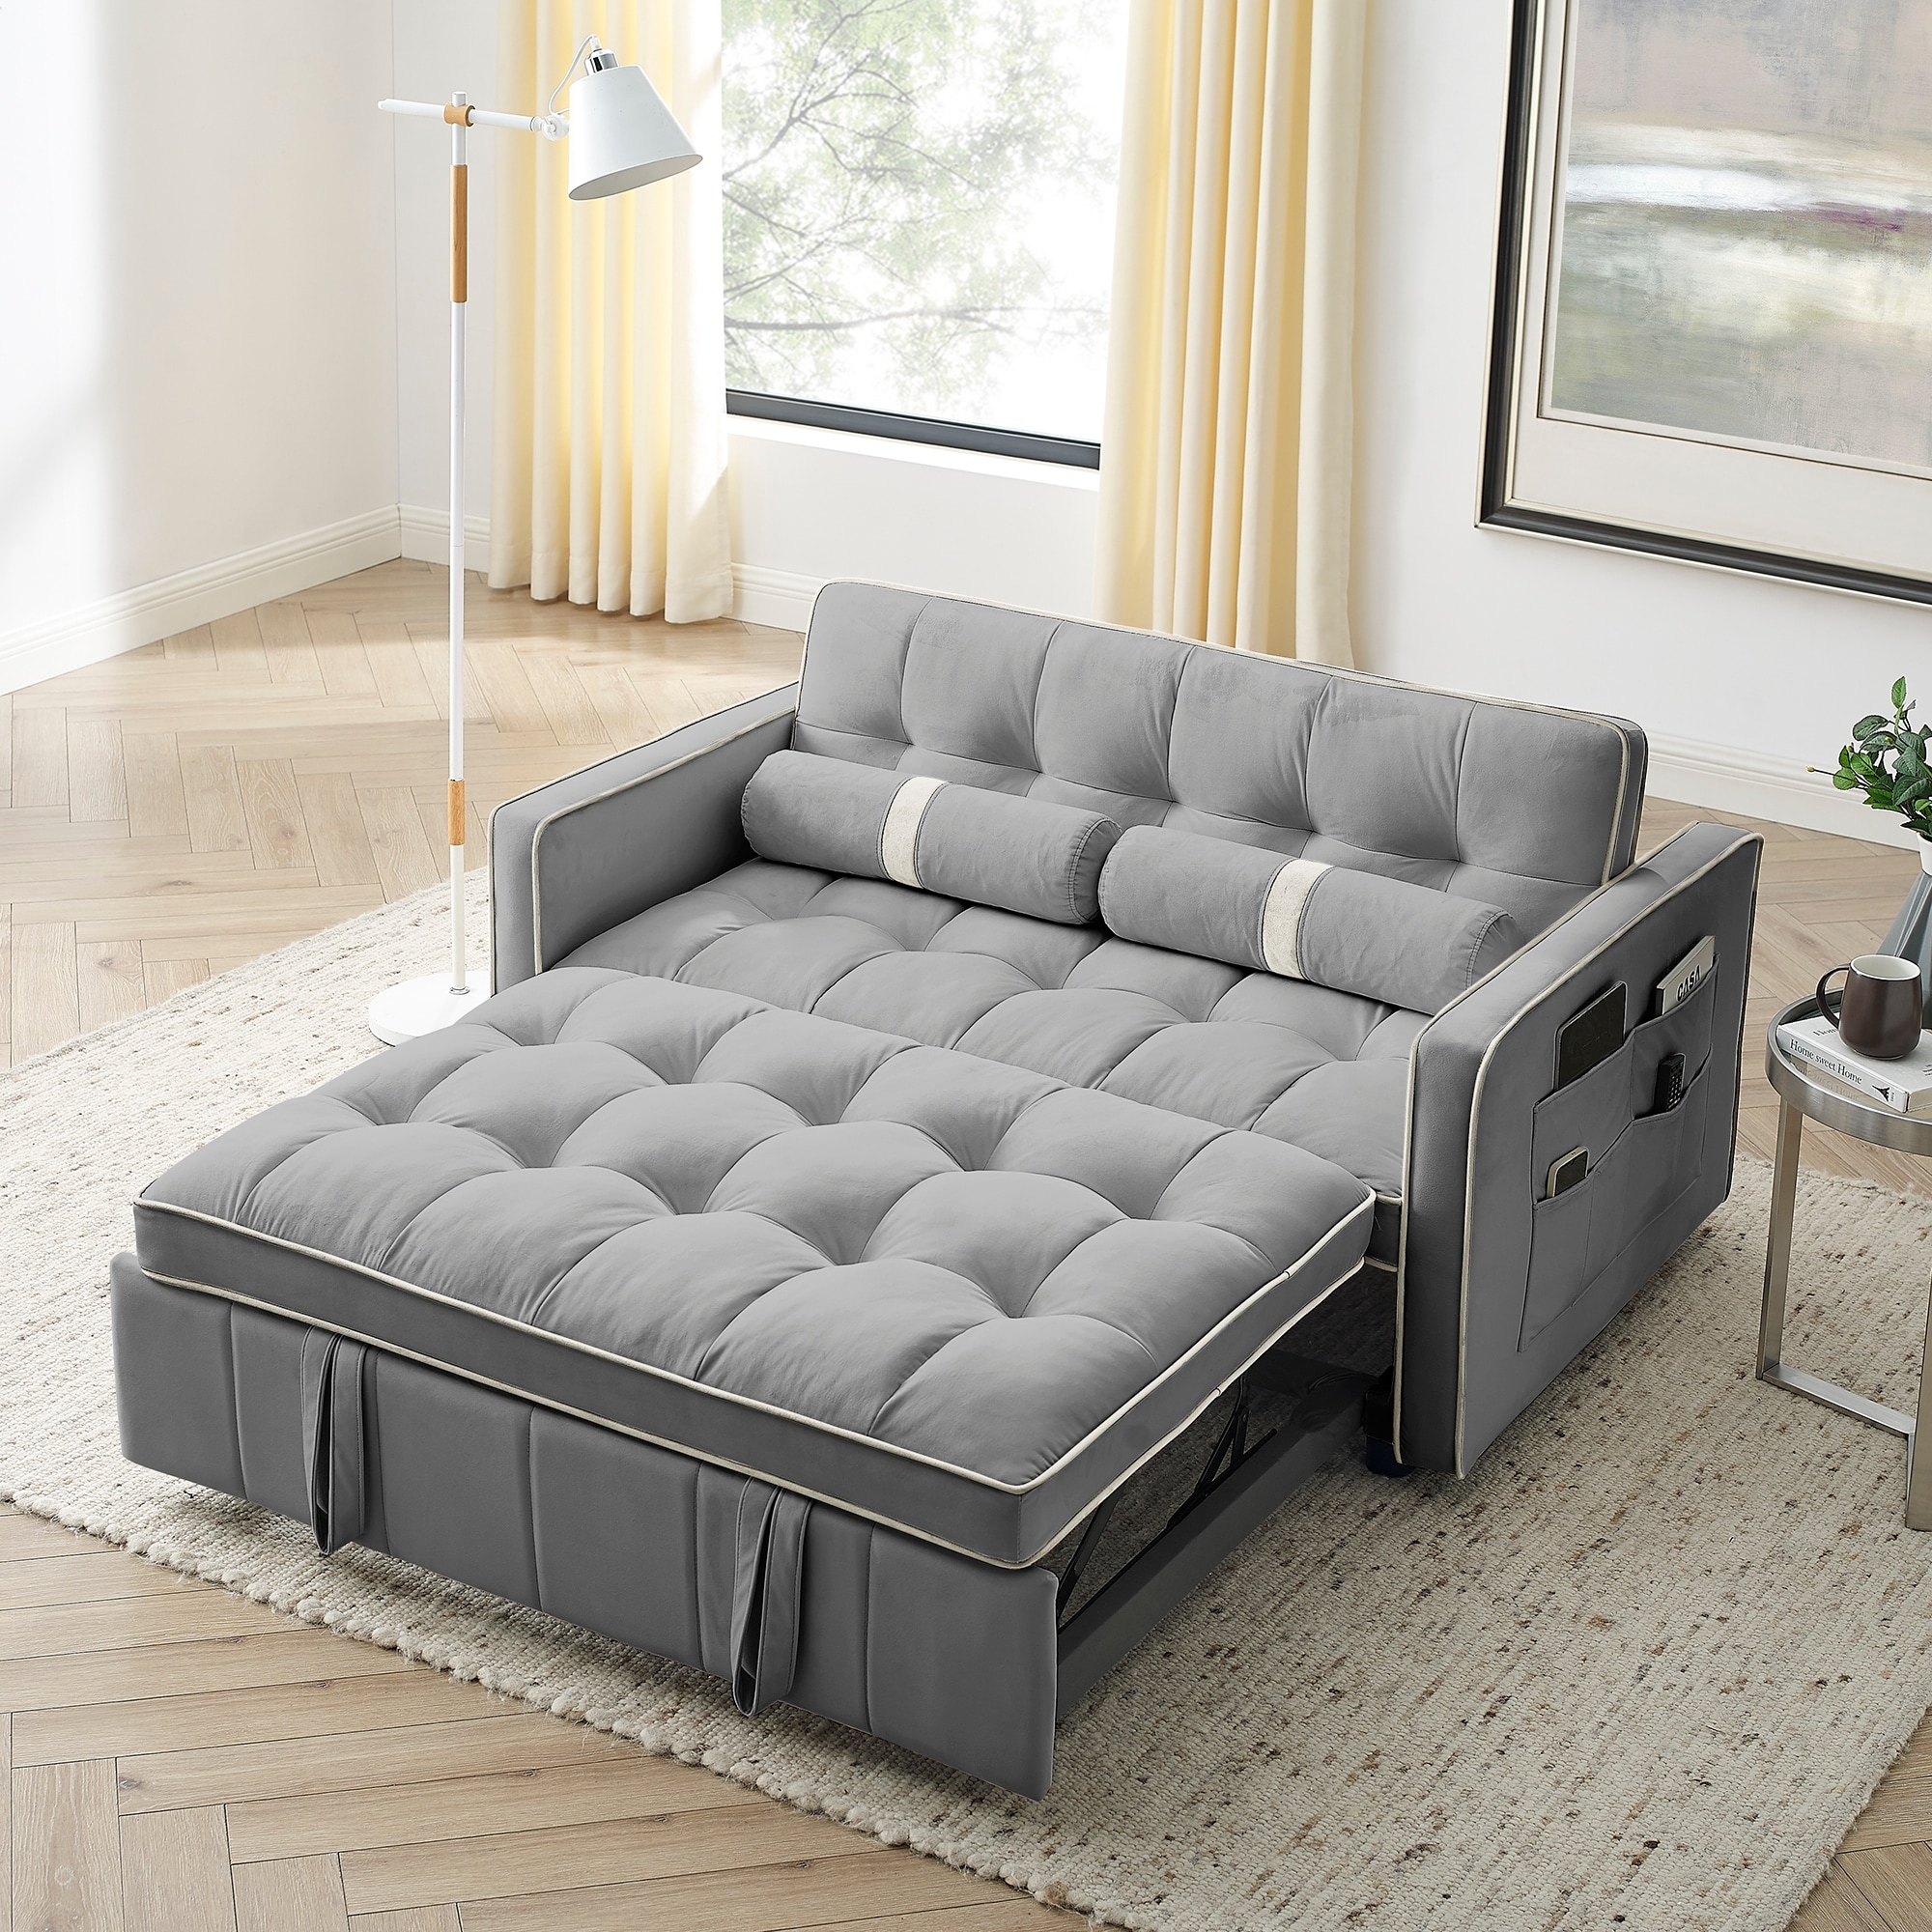 55.5 Pull Out Sofa Bed  2 Seater Loveseats Sofa Couch With Side Pockets  Adjsutable Backrest And Lumbar Pillows